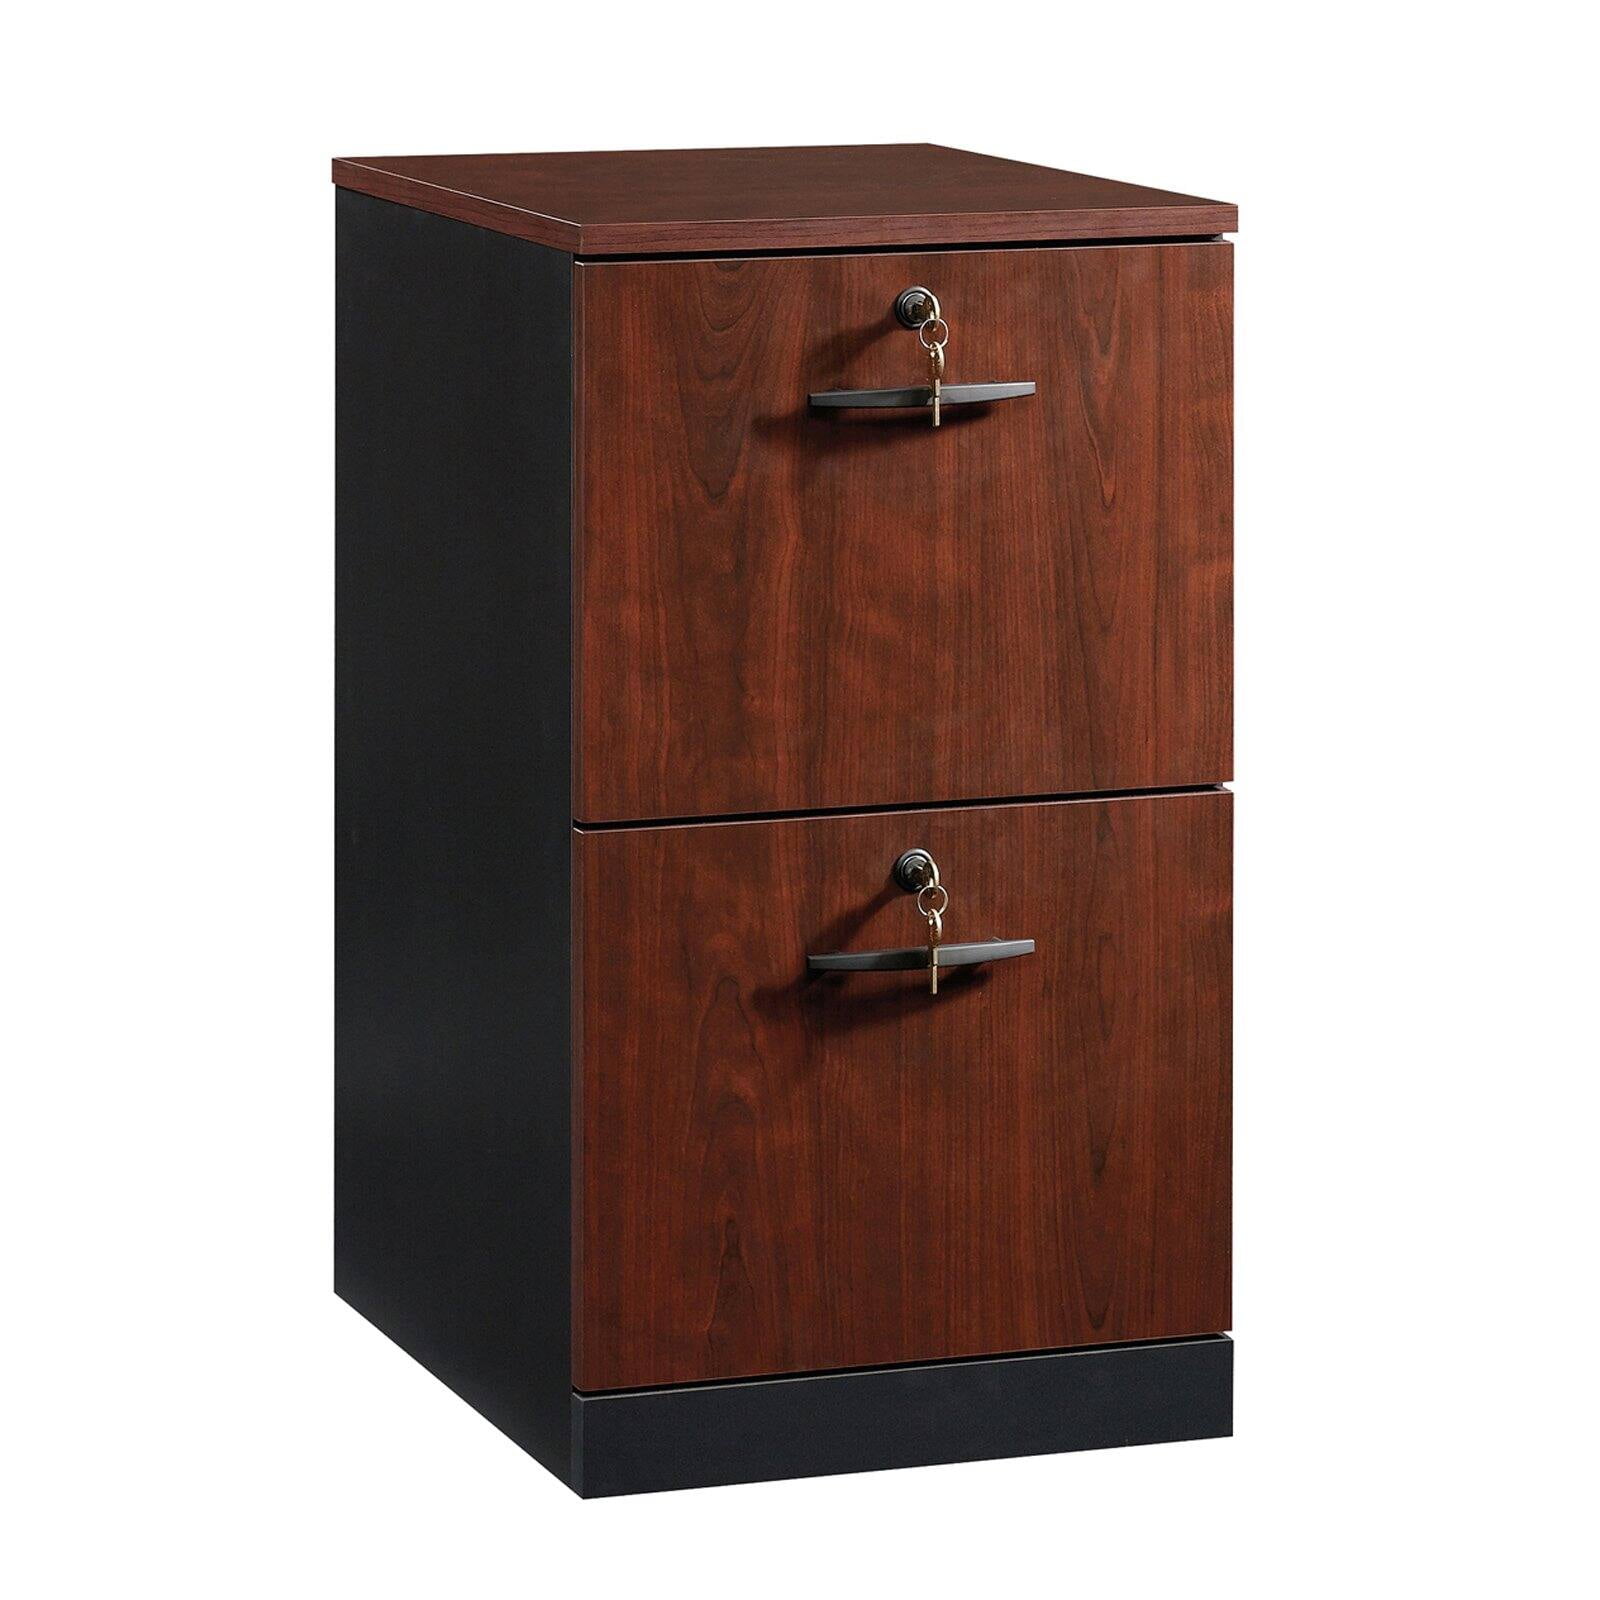 Cooper 2 Drawer Letter File Cabinet in Charcoal